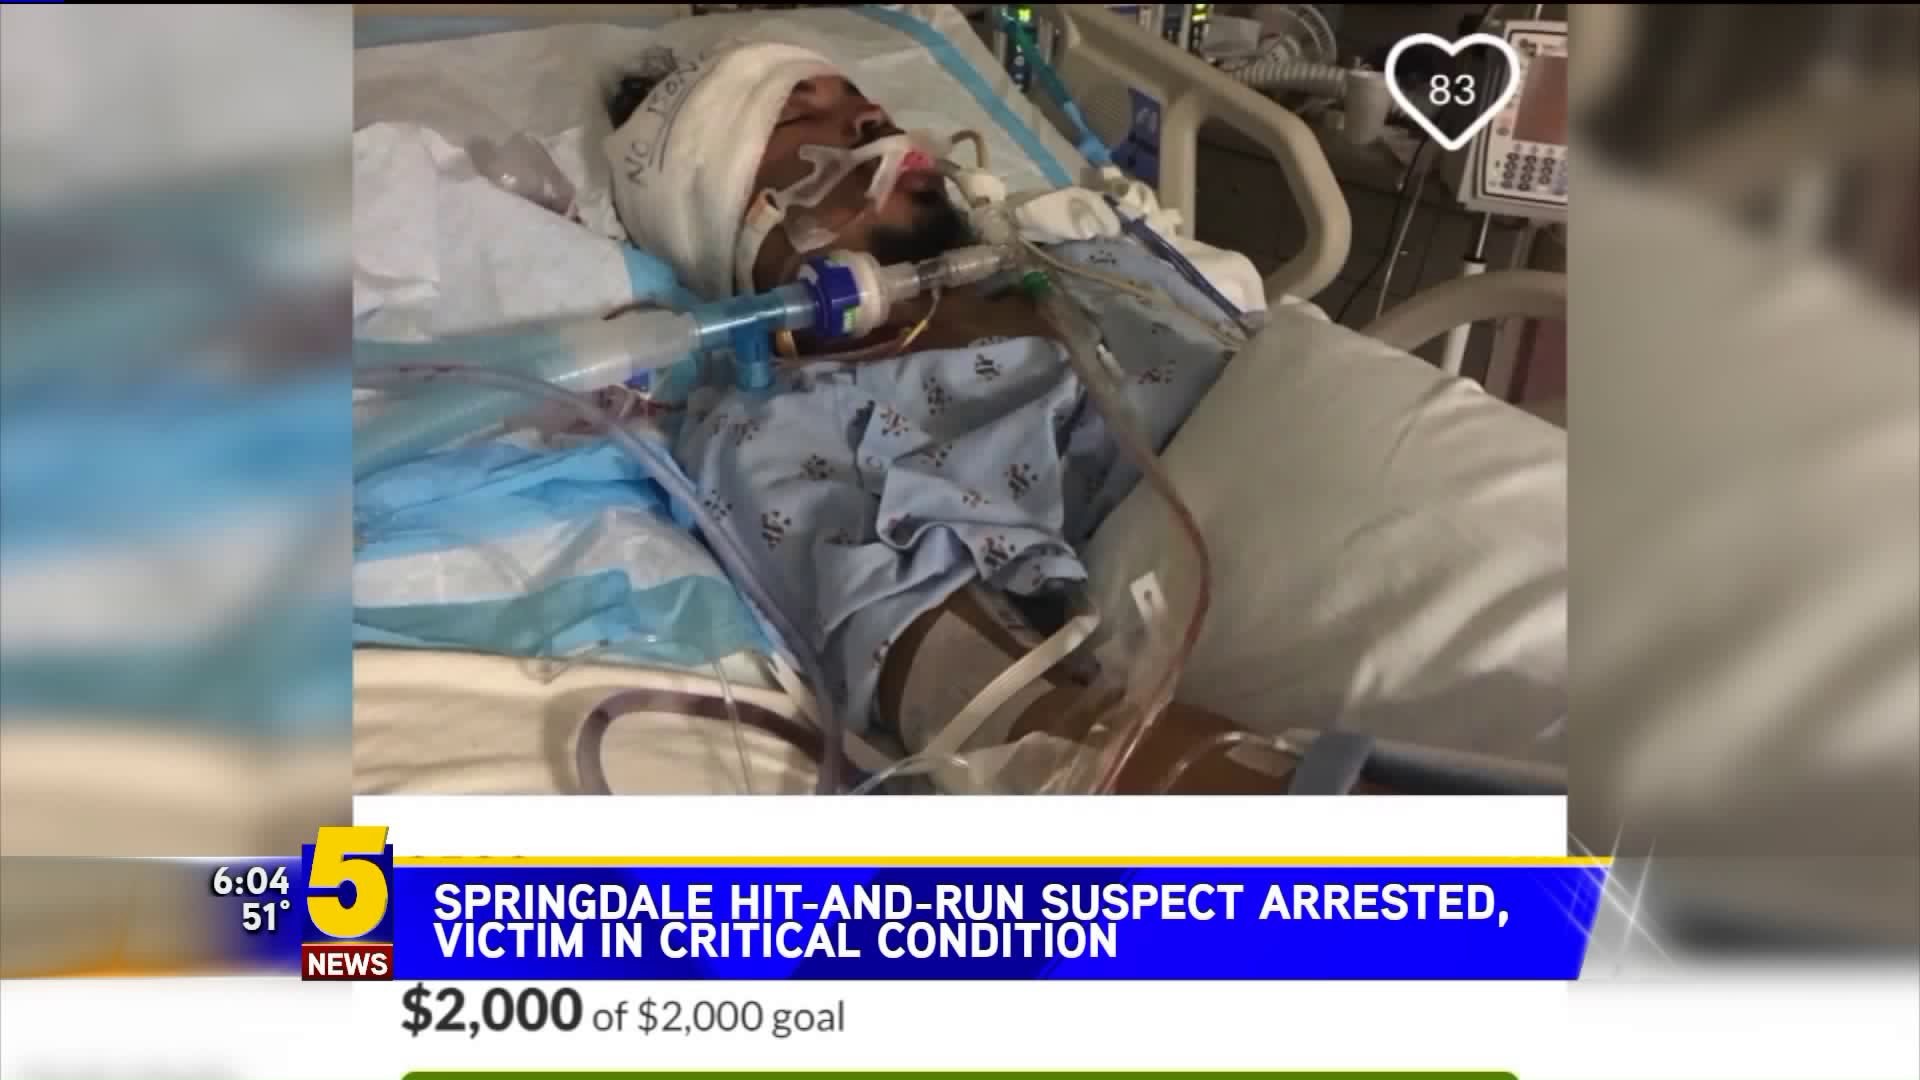 Springdale Hit-And-Run Suspect Arrested, Victim In Critical Condition